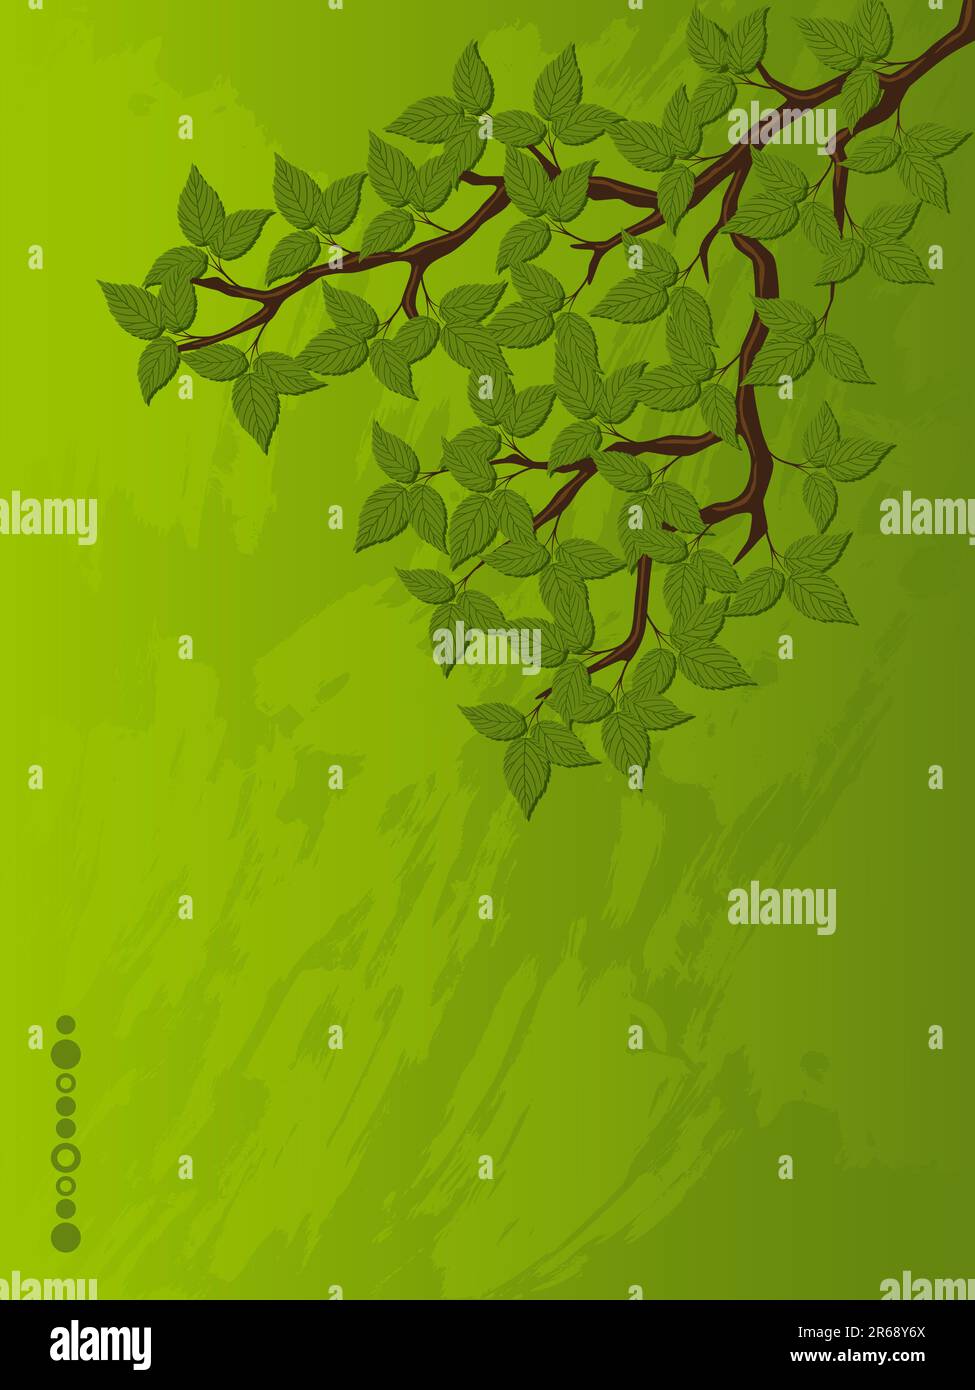 Grunge background with a tree branch. Vector illustration. Stock Vector